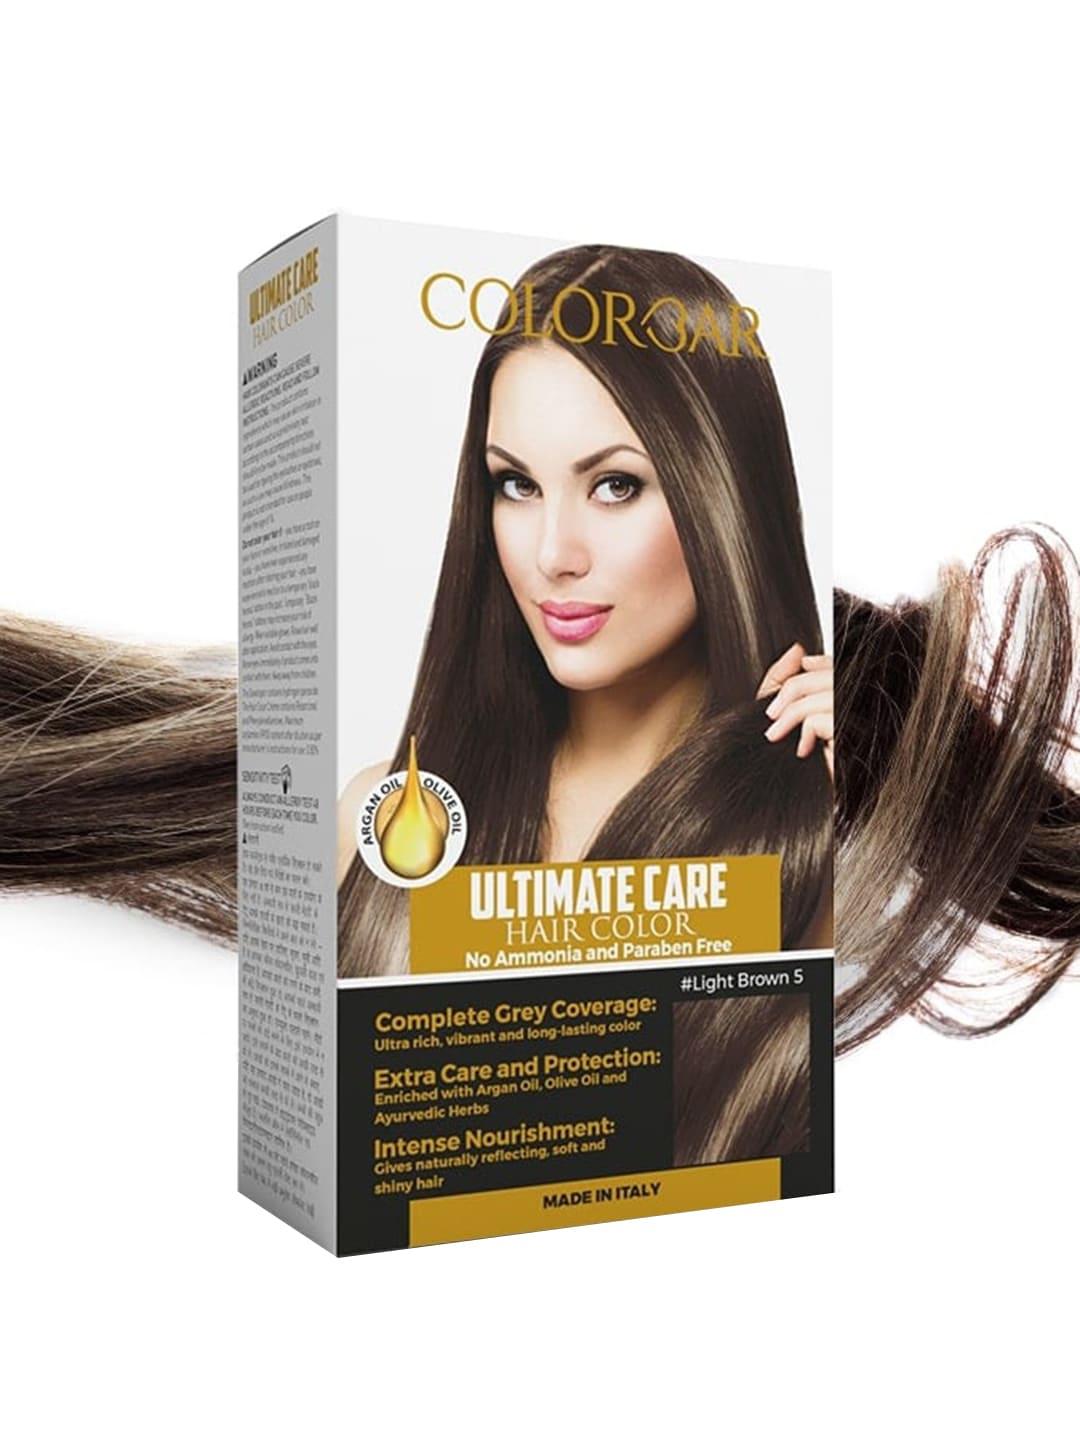 Colorbar Ultimate Care Hair Color - Light Brown 5 145 ml